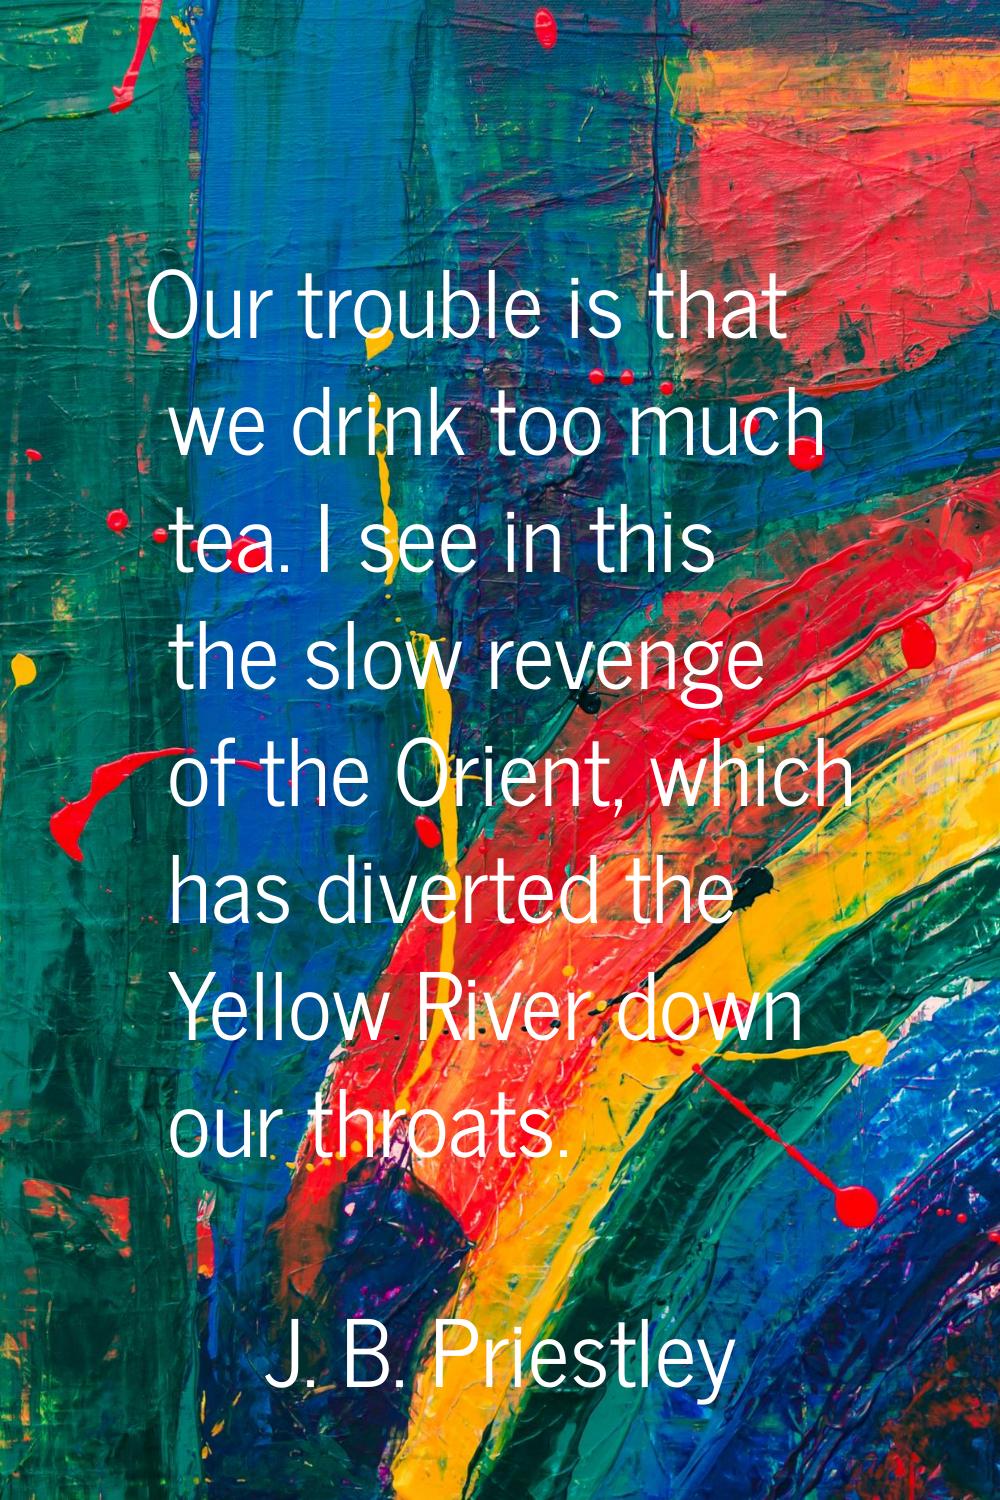 Our trouble is that we drink too much tea. I see in this the slow revenge of the Orient, which has 